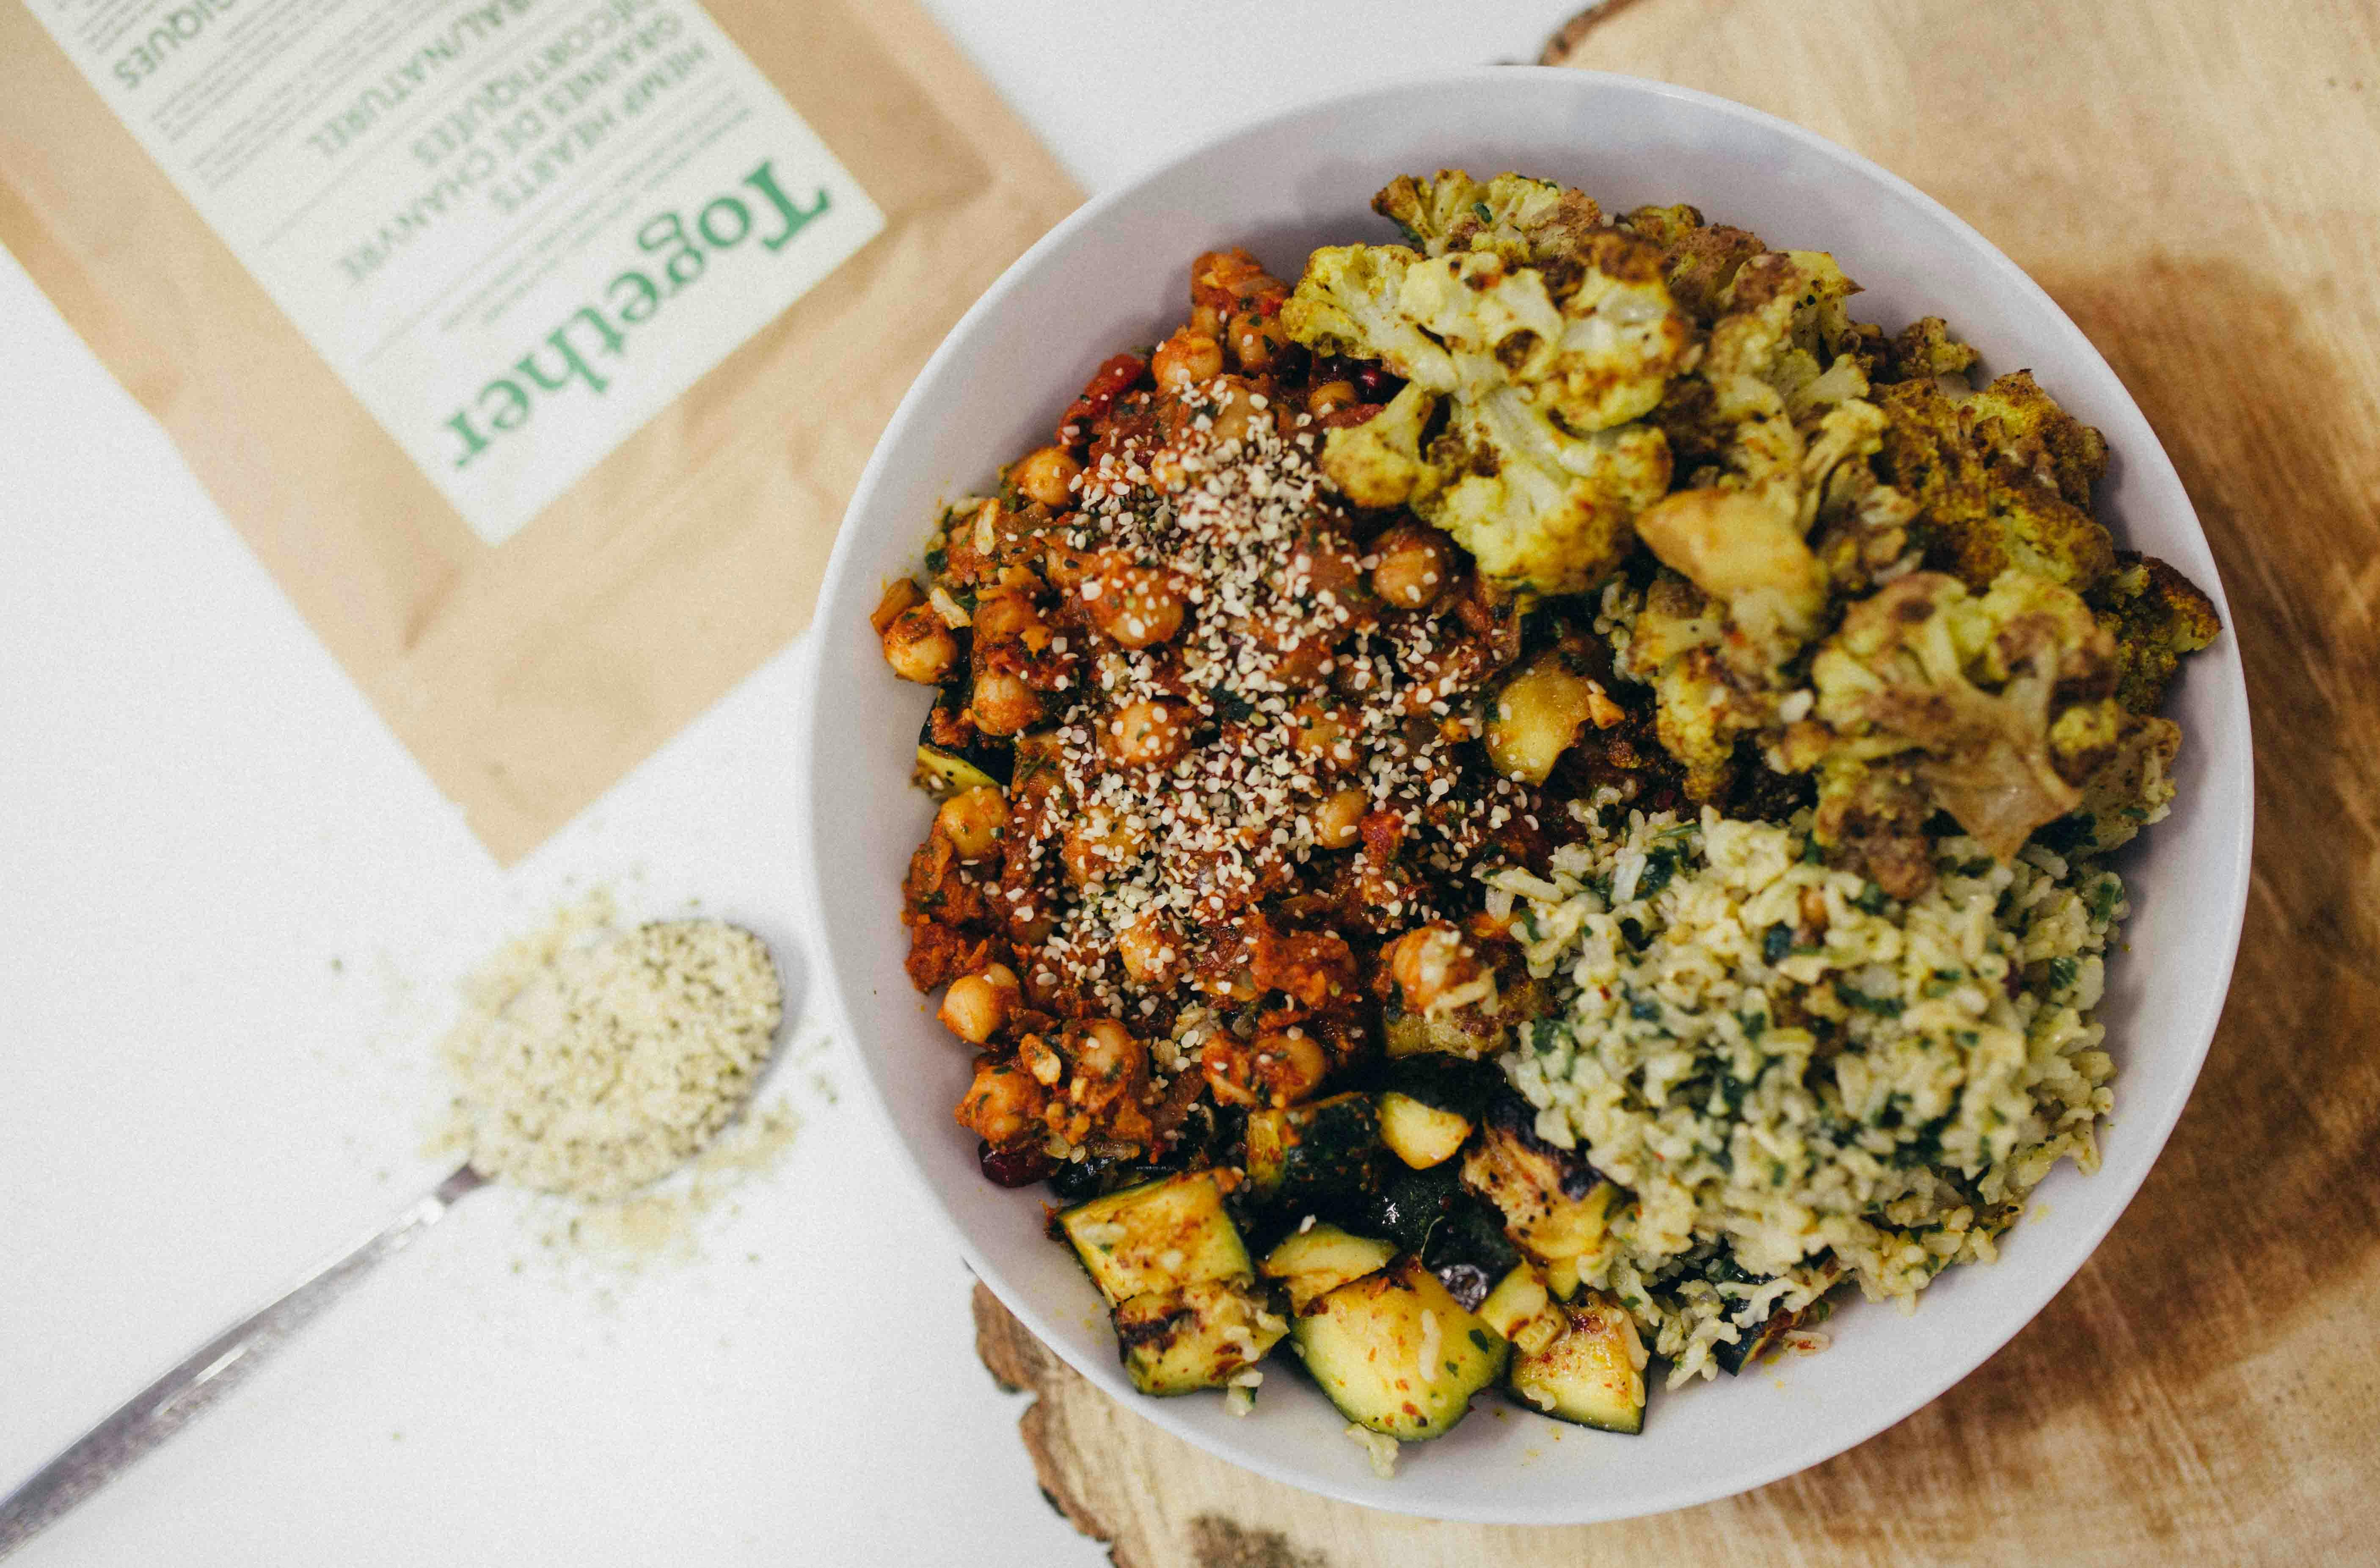 Hemp hearts topping a veggie bowl from Together Hemp.